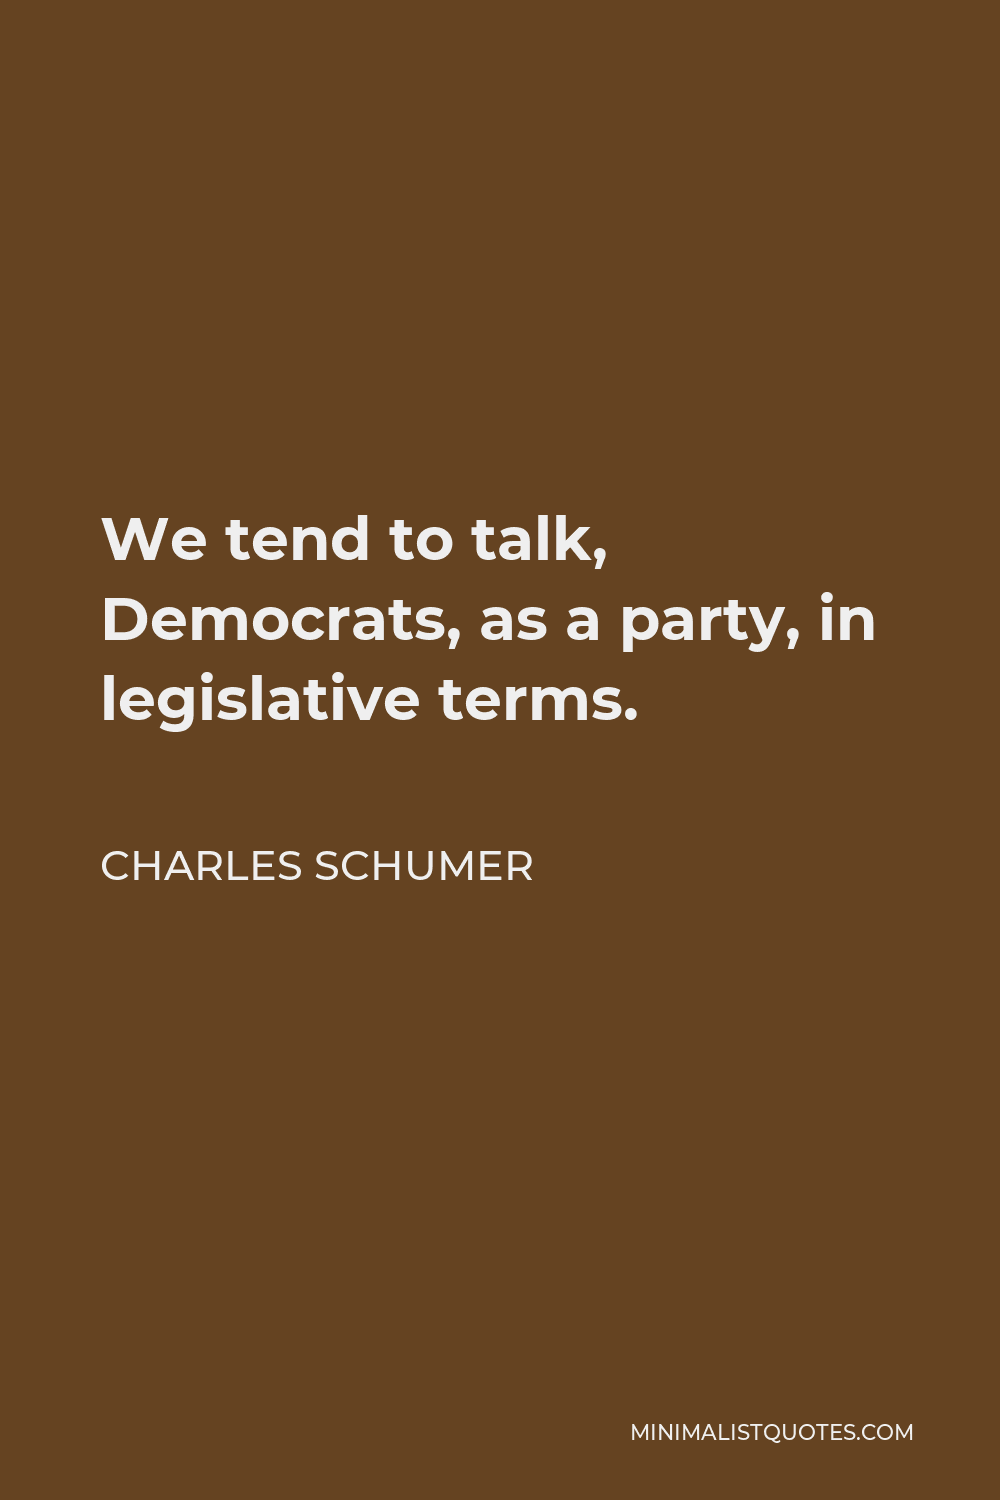 Charles Schumer Quote - We tend to talk, Democrats, as a party, in legislative terms.